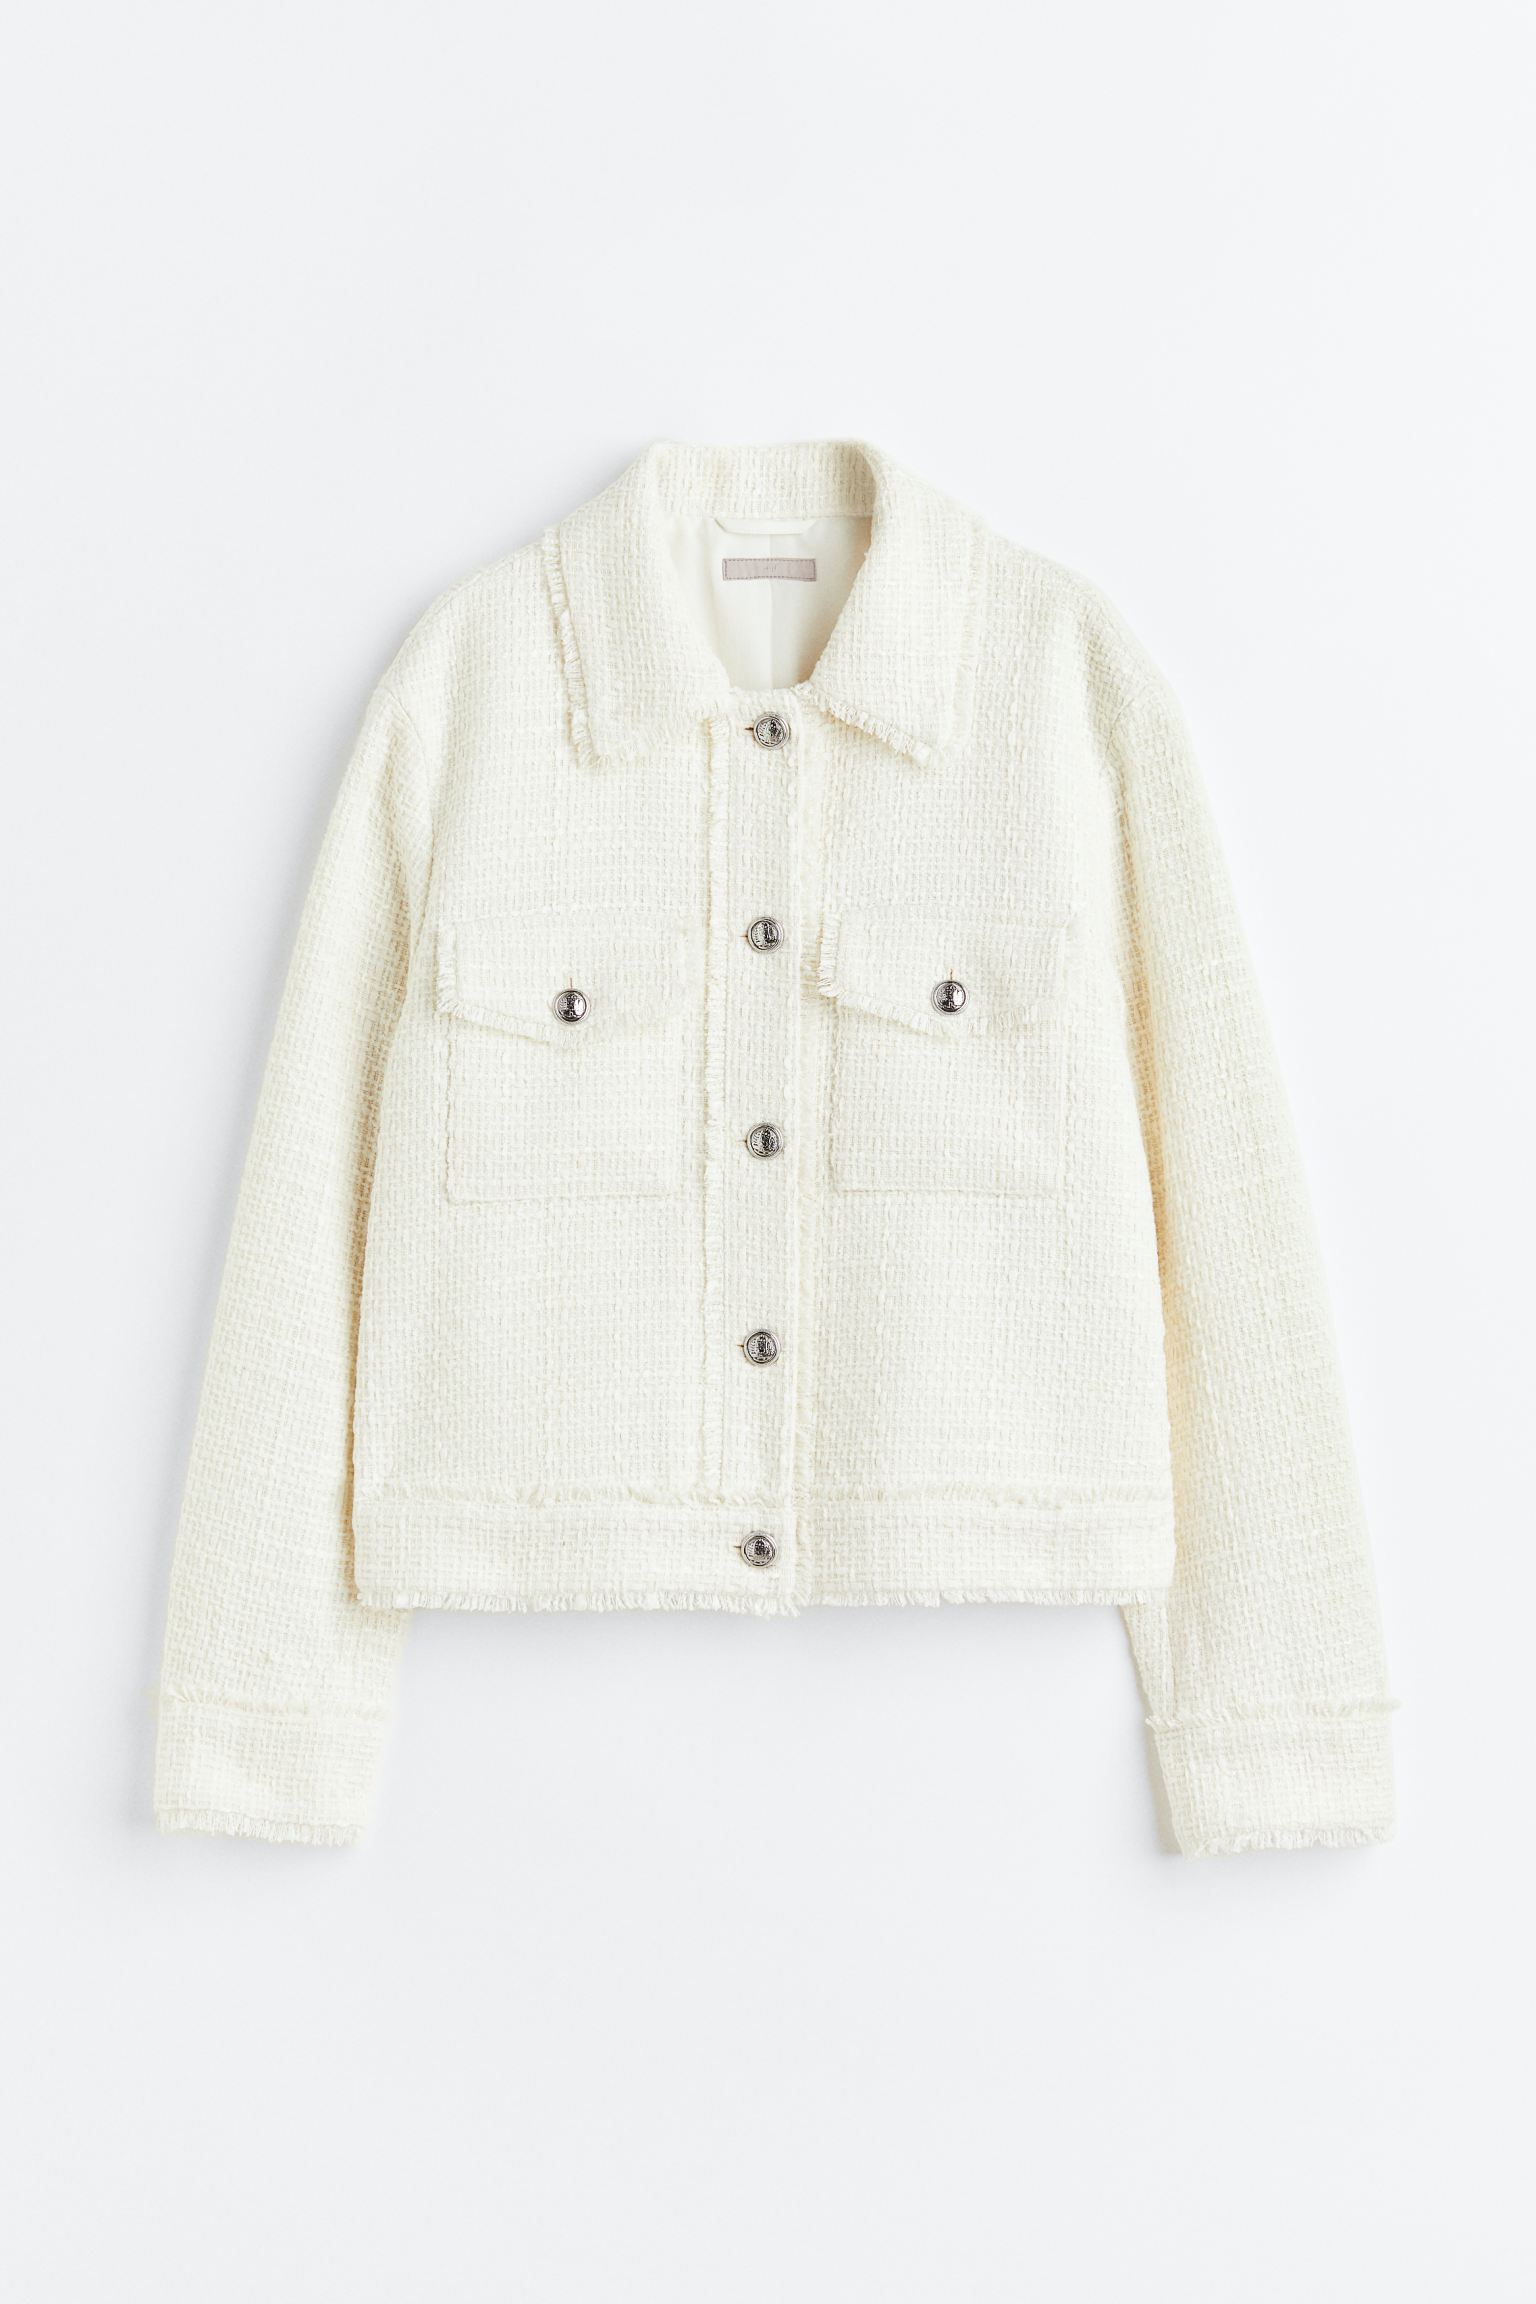 H&M Bouclé Jackets are a Key Buy for Autumn | Who What Wear UK